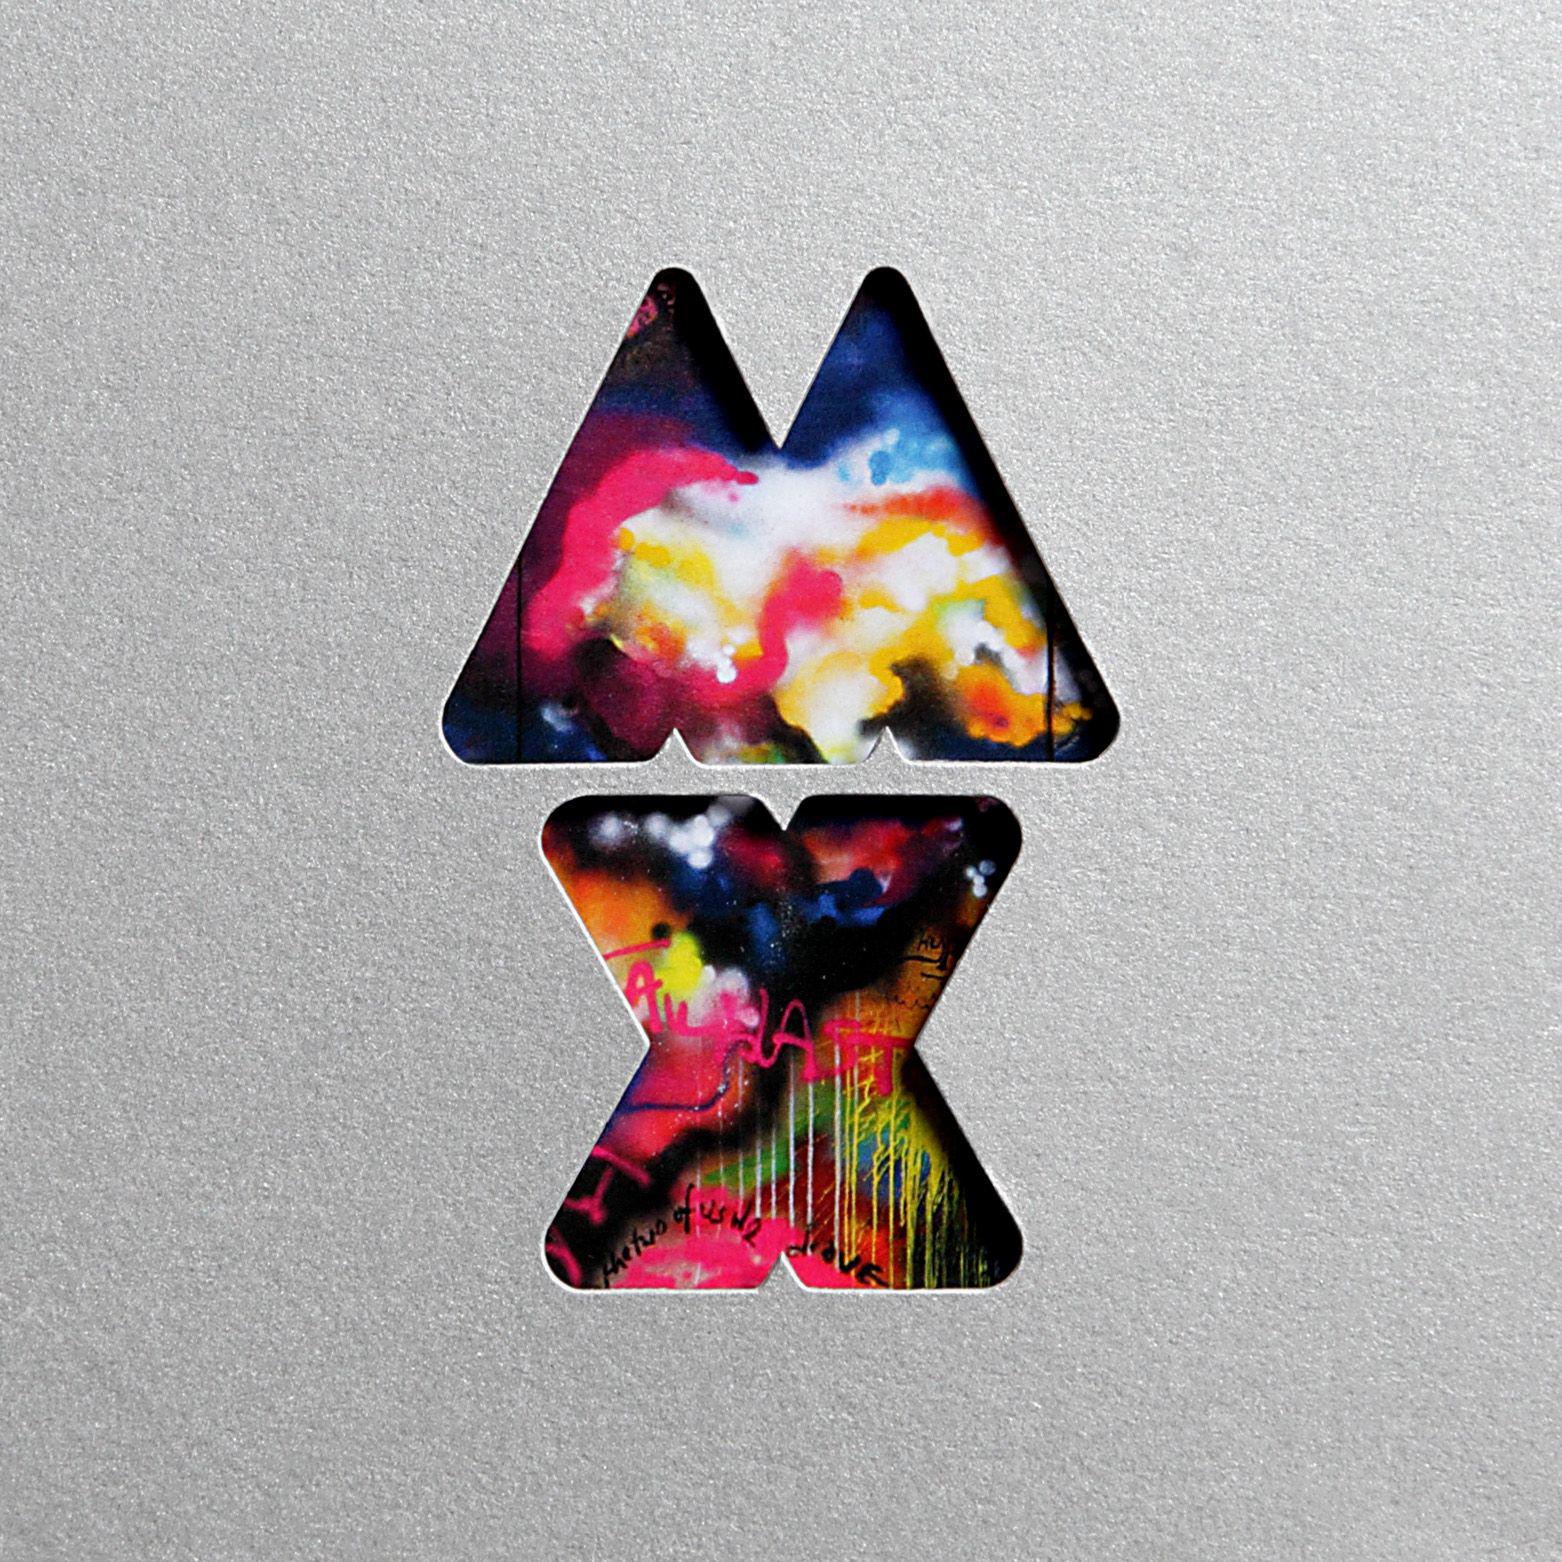 Up in Flames歌词 歌手Coldplay-专辑Mylo Xyloto-单曲《Up in Flames》LRC歌词下载